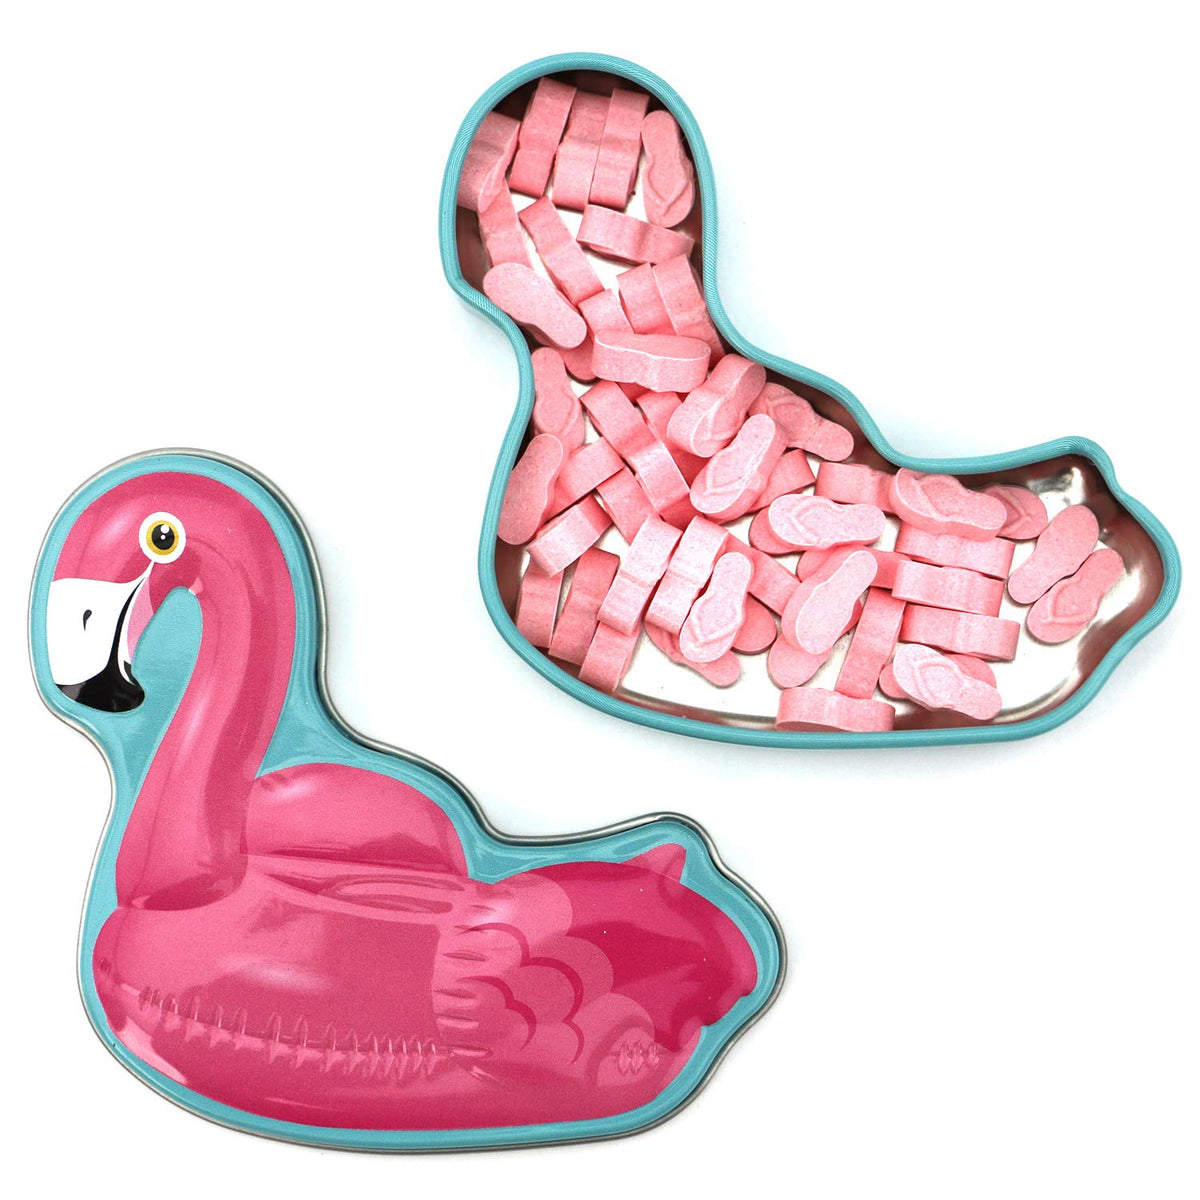 Boston America Candy Tin - Pool Party pink Flamingo novelty fun gift gifts sour candies 